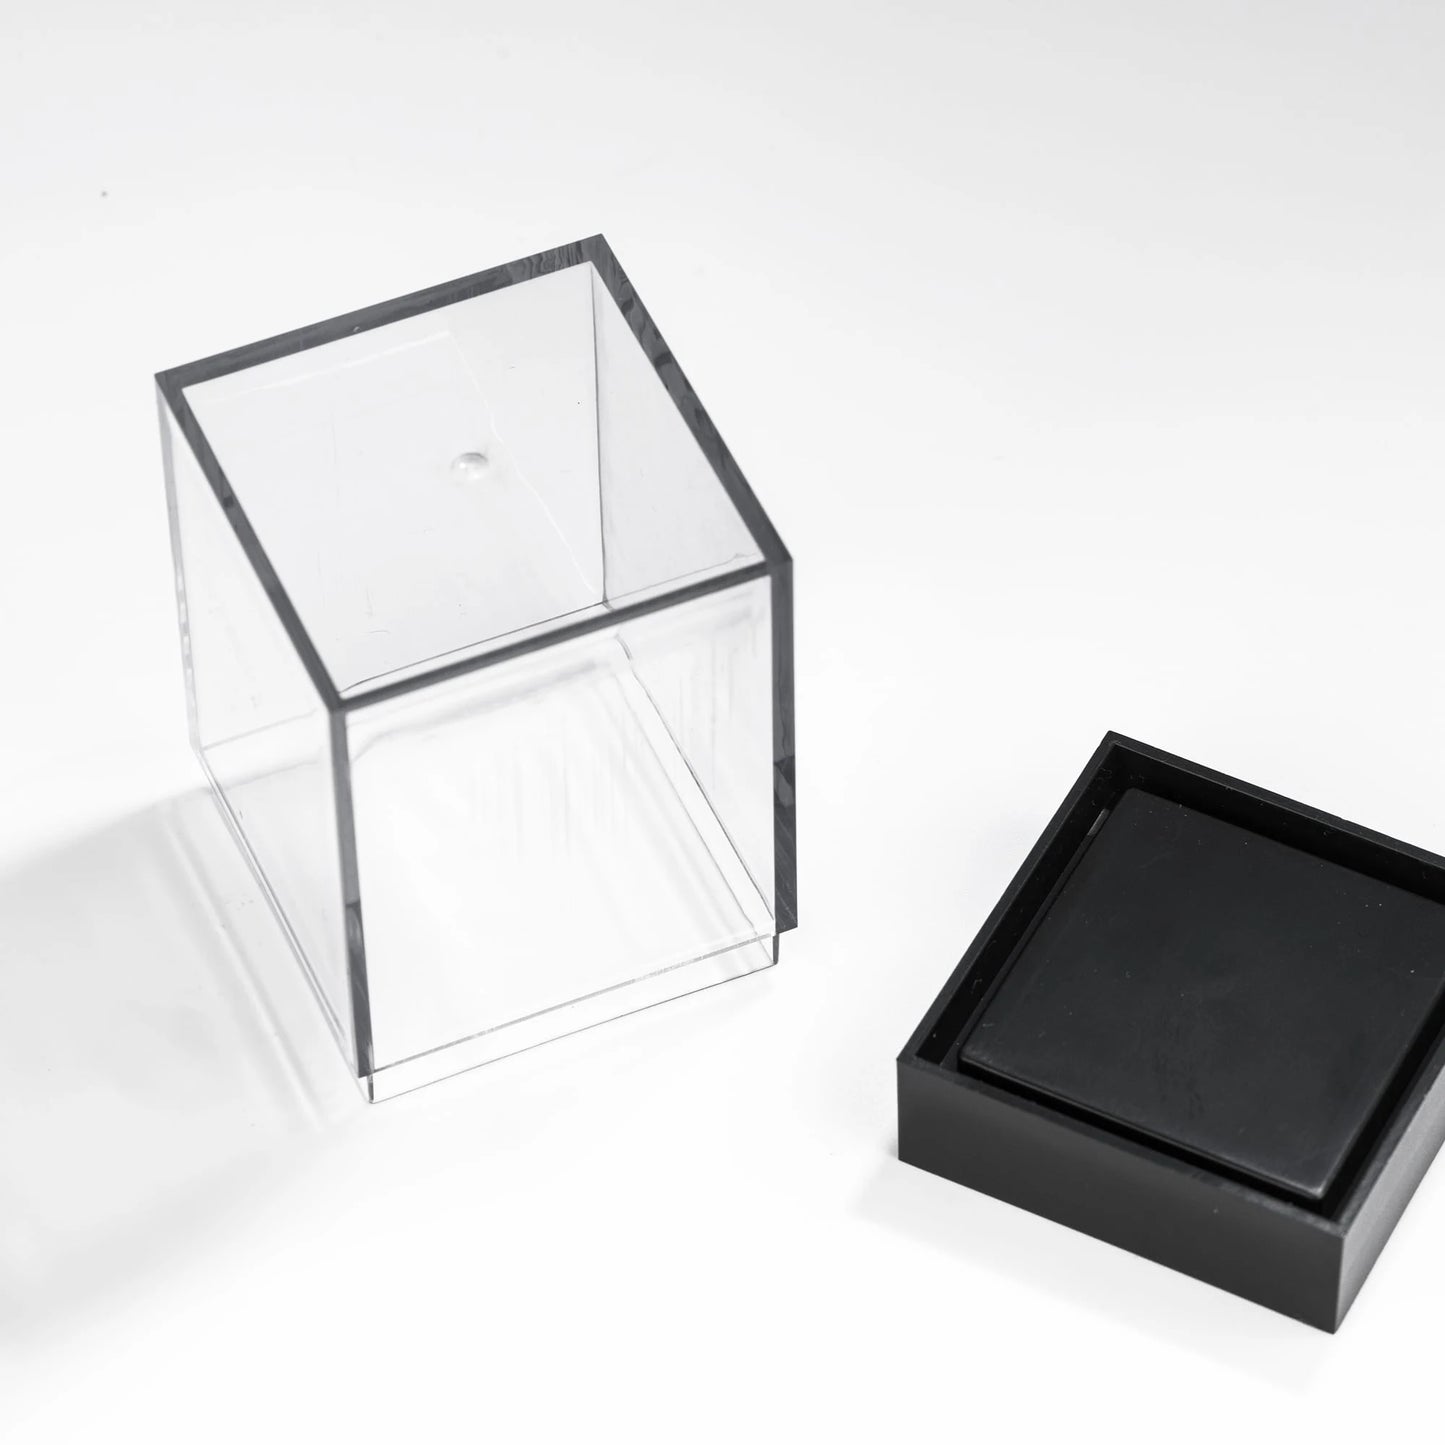 Dice Show Box ,Clear Acrylic Display Case,Black Base Dustproof Protection Model Box,Toy Display Box